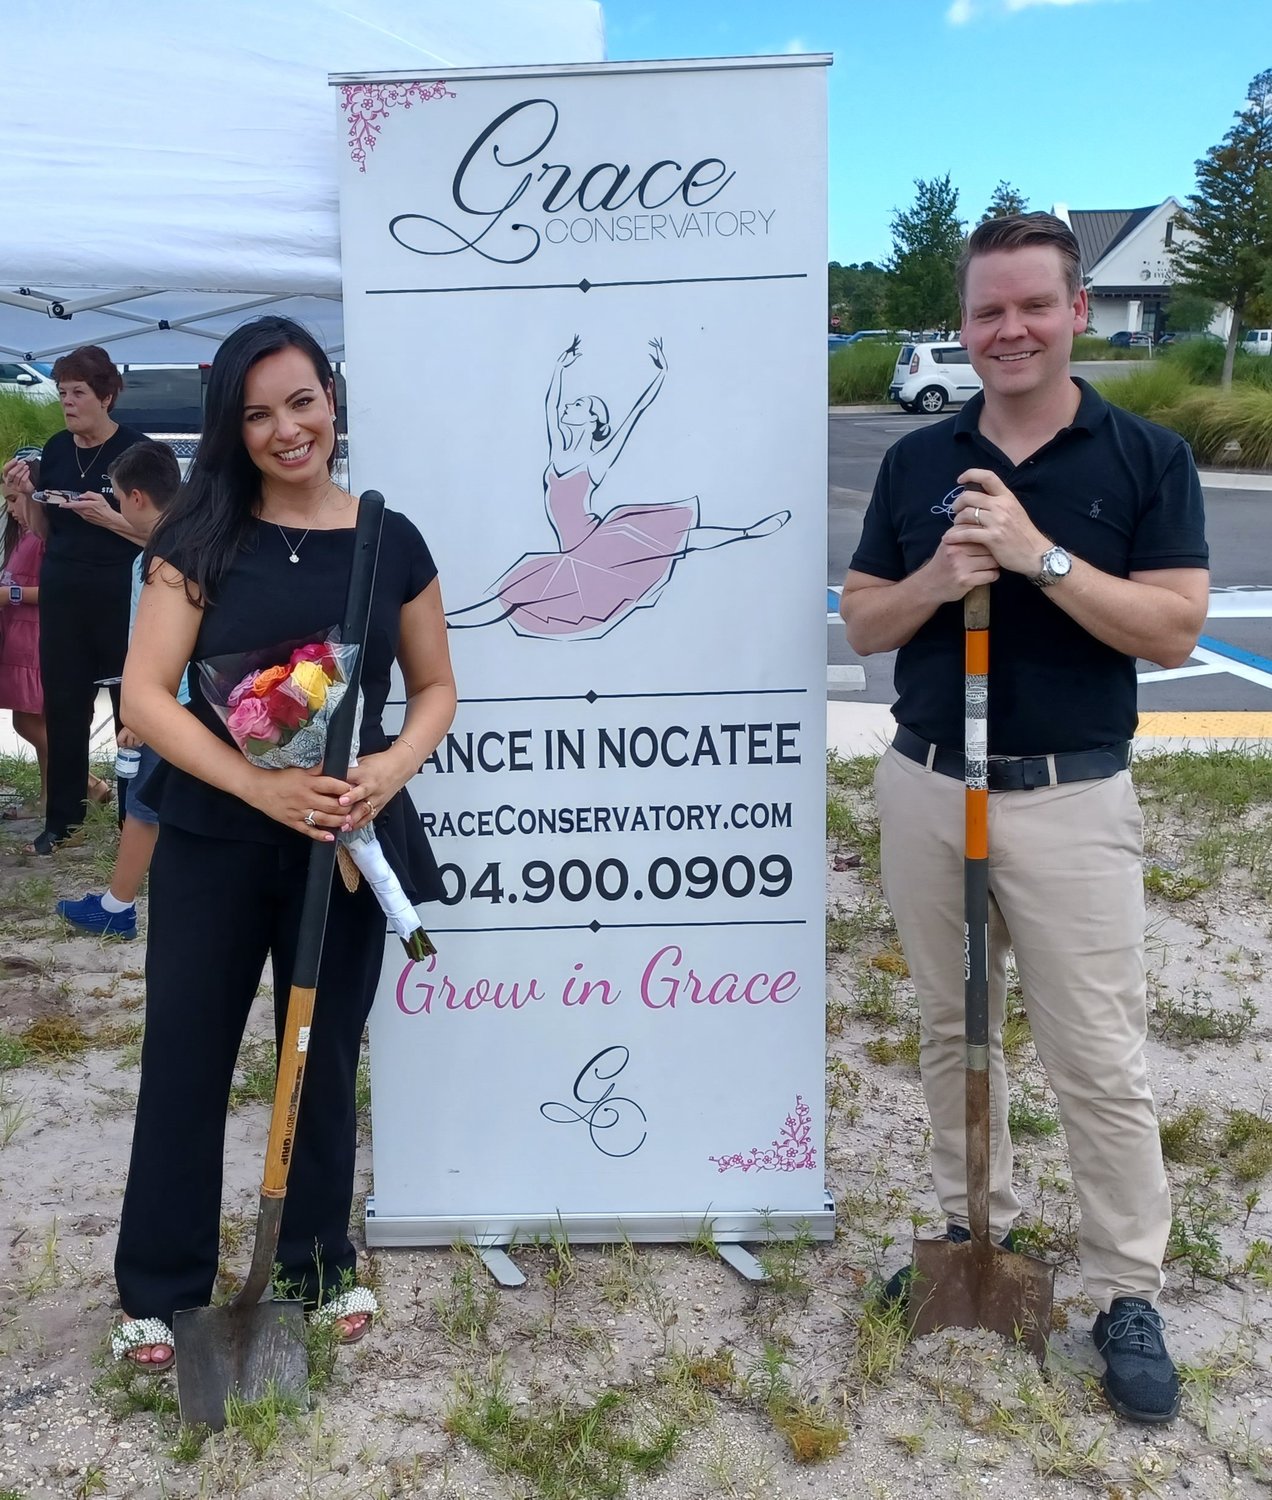 Kristina and Vaughn Robison broke ground Aug. 9 for the Grace Conservatory’s new dance studio.